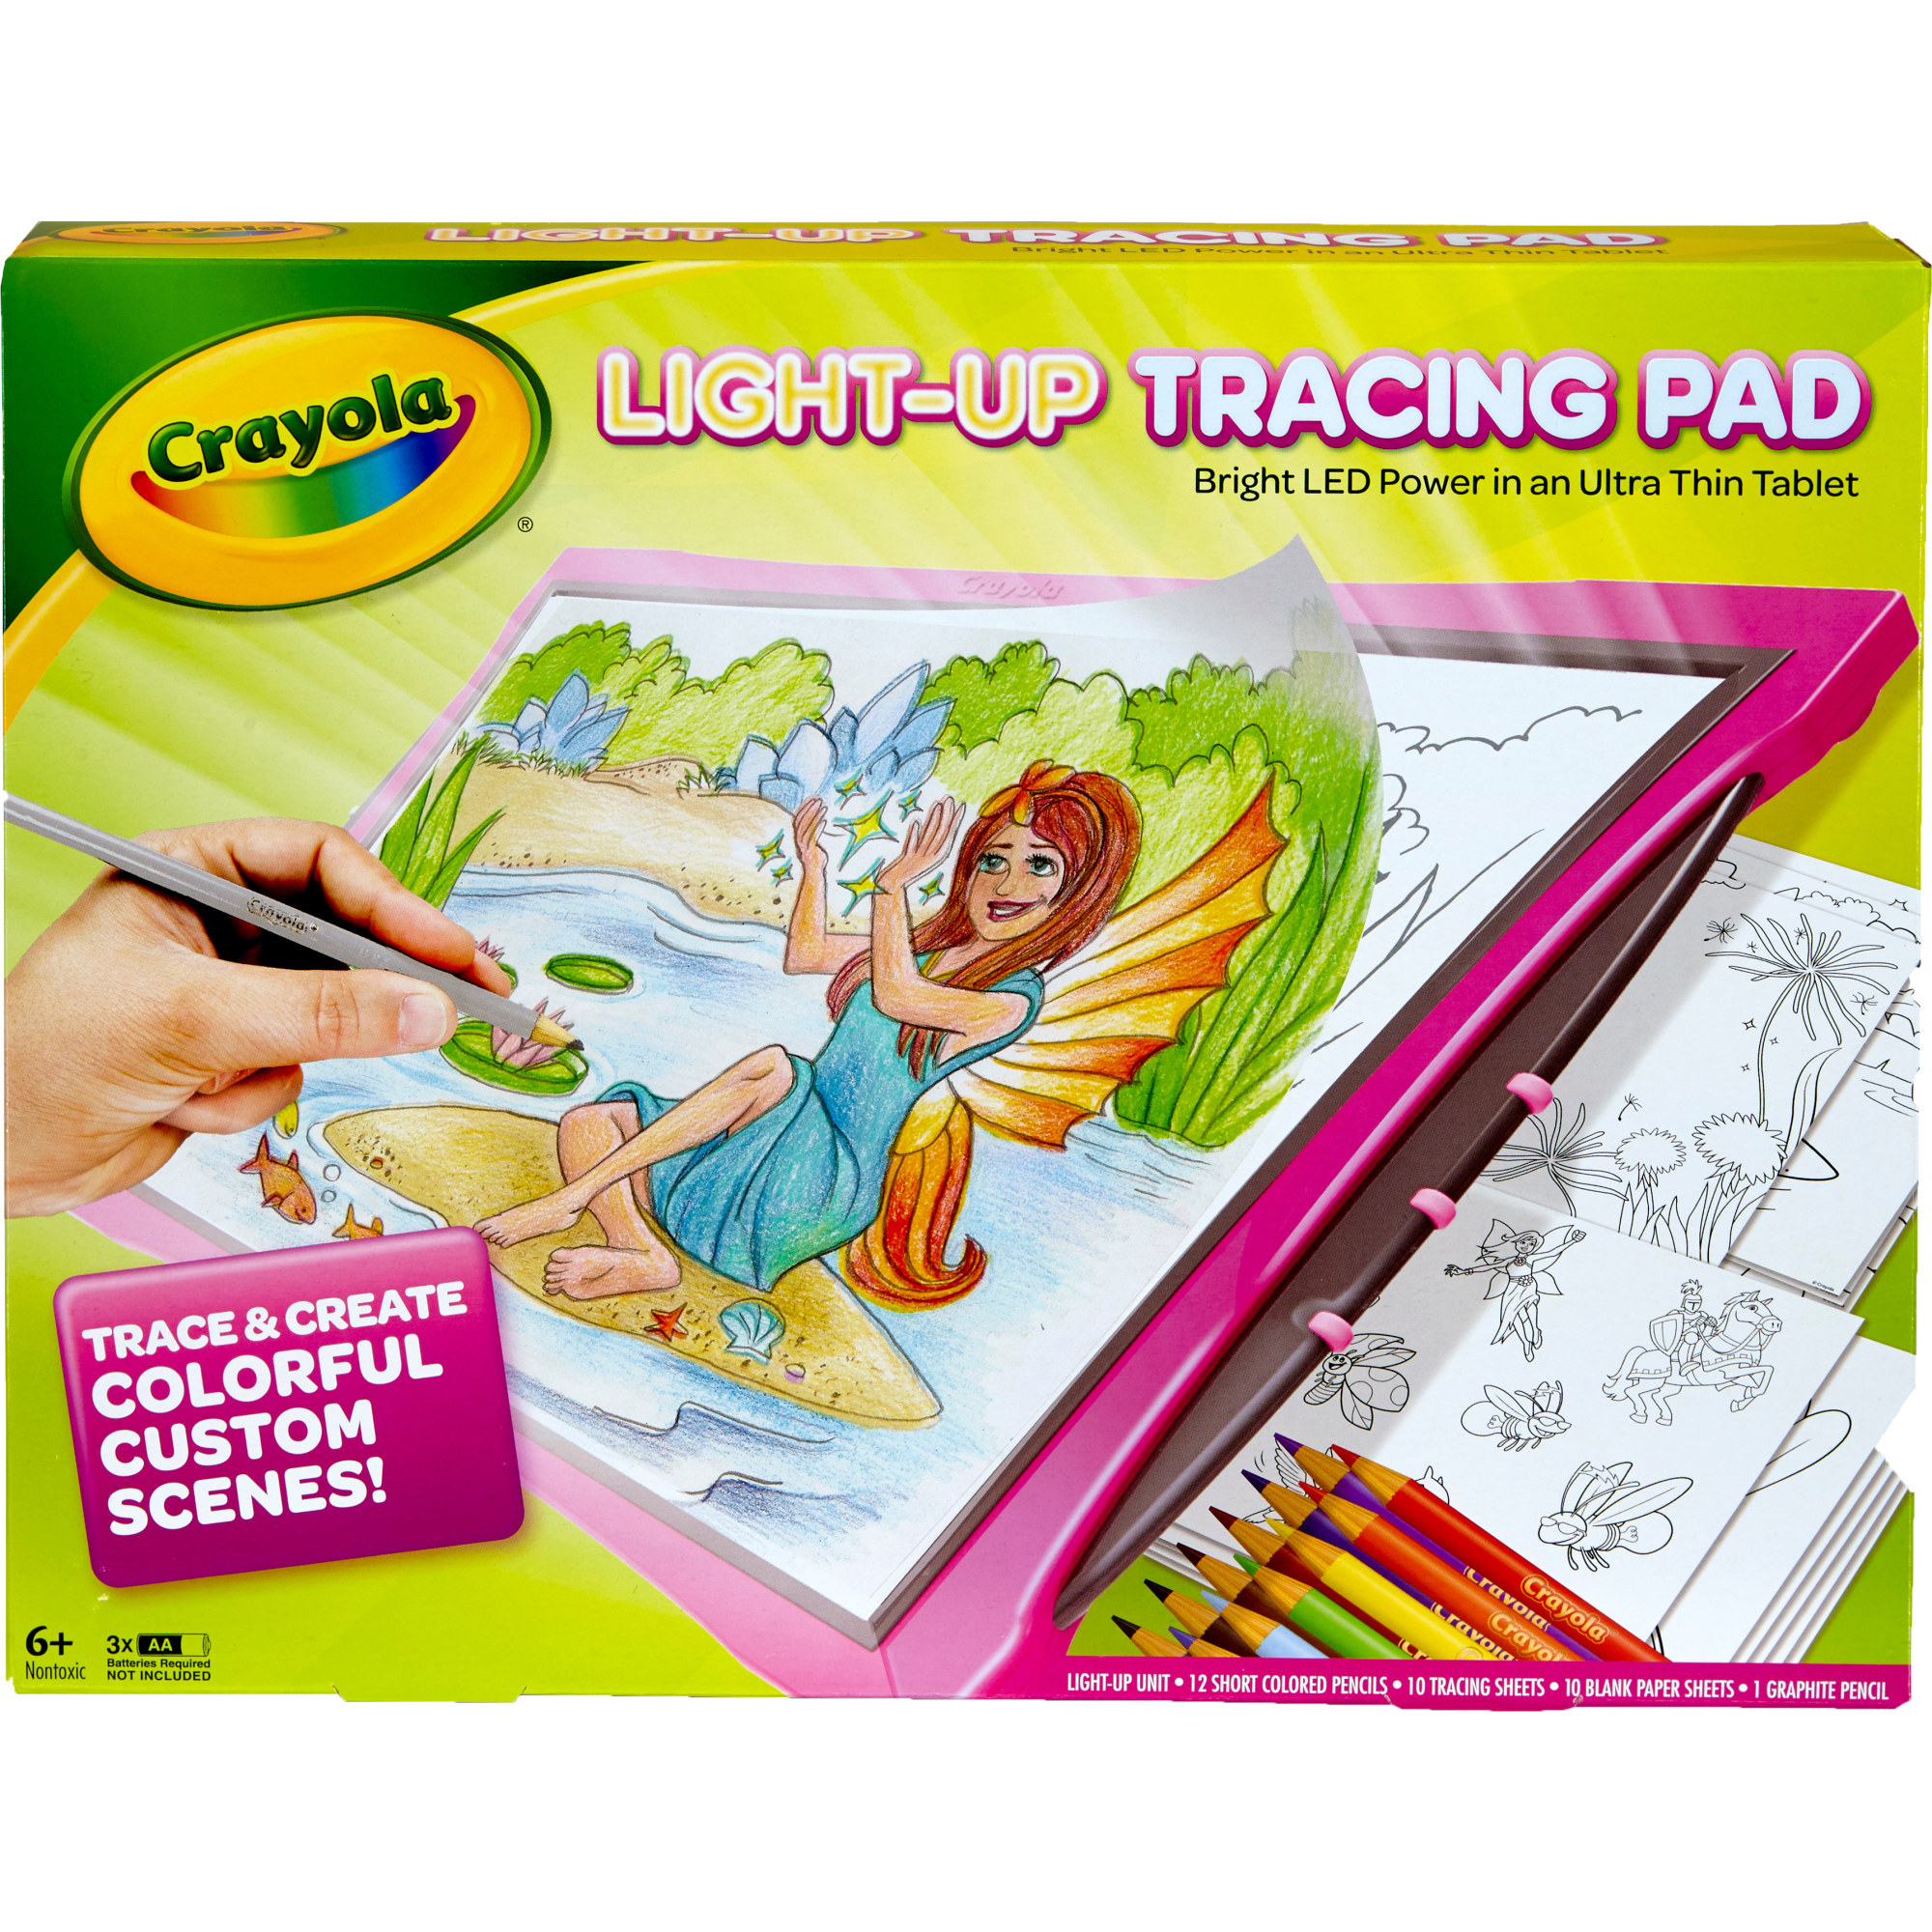 Crayola Light-up Tracing Pad Pink, Gifts for Unisex Child, Ages 6, 7, 8, 9 - image 1 of 7